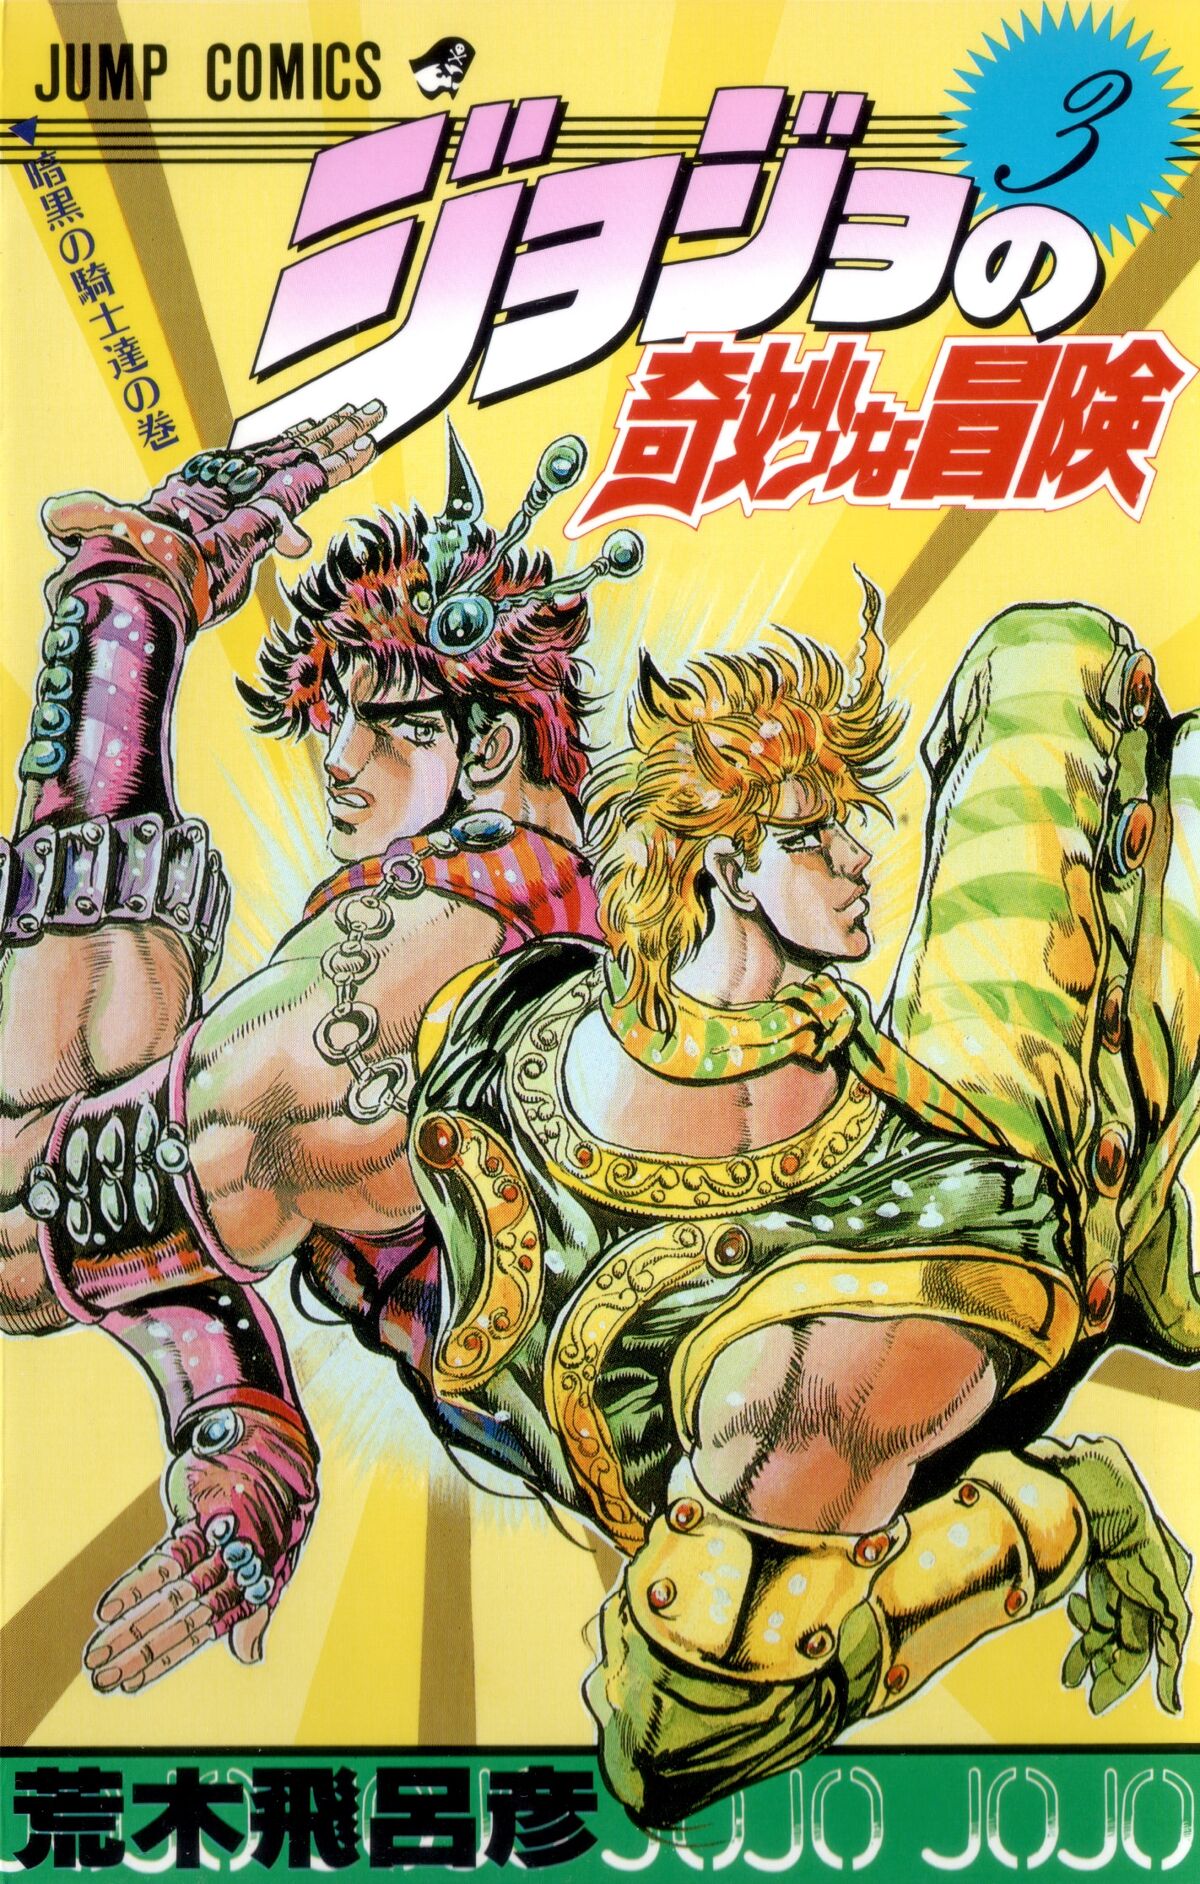 Phantom Blood (JP Exclusive for PS2) translated to English! : r